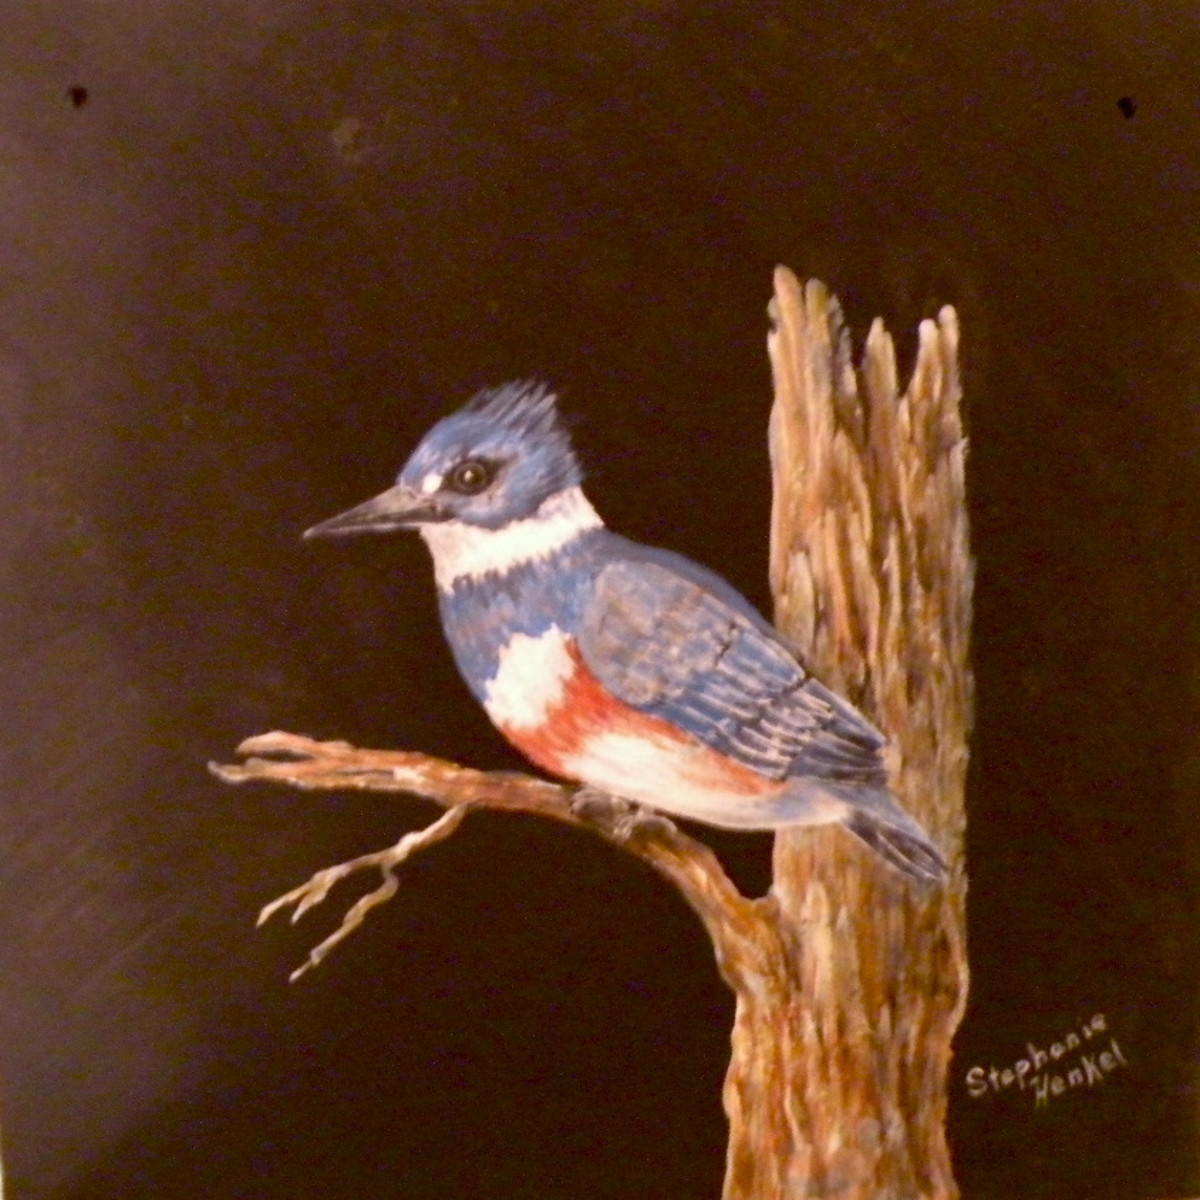 My painting of a Kingfisher on slate was a gift to my niece. It may become one of her family heirlooms. 